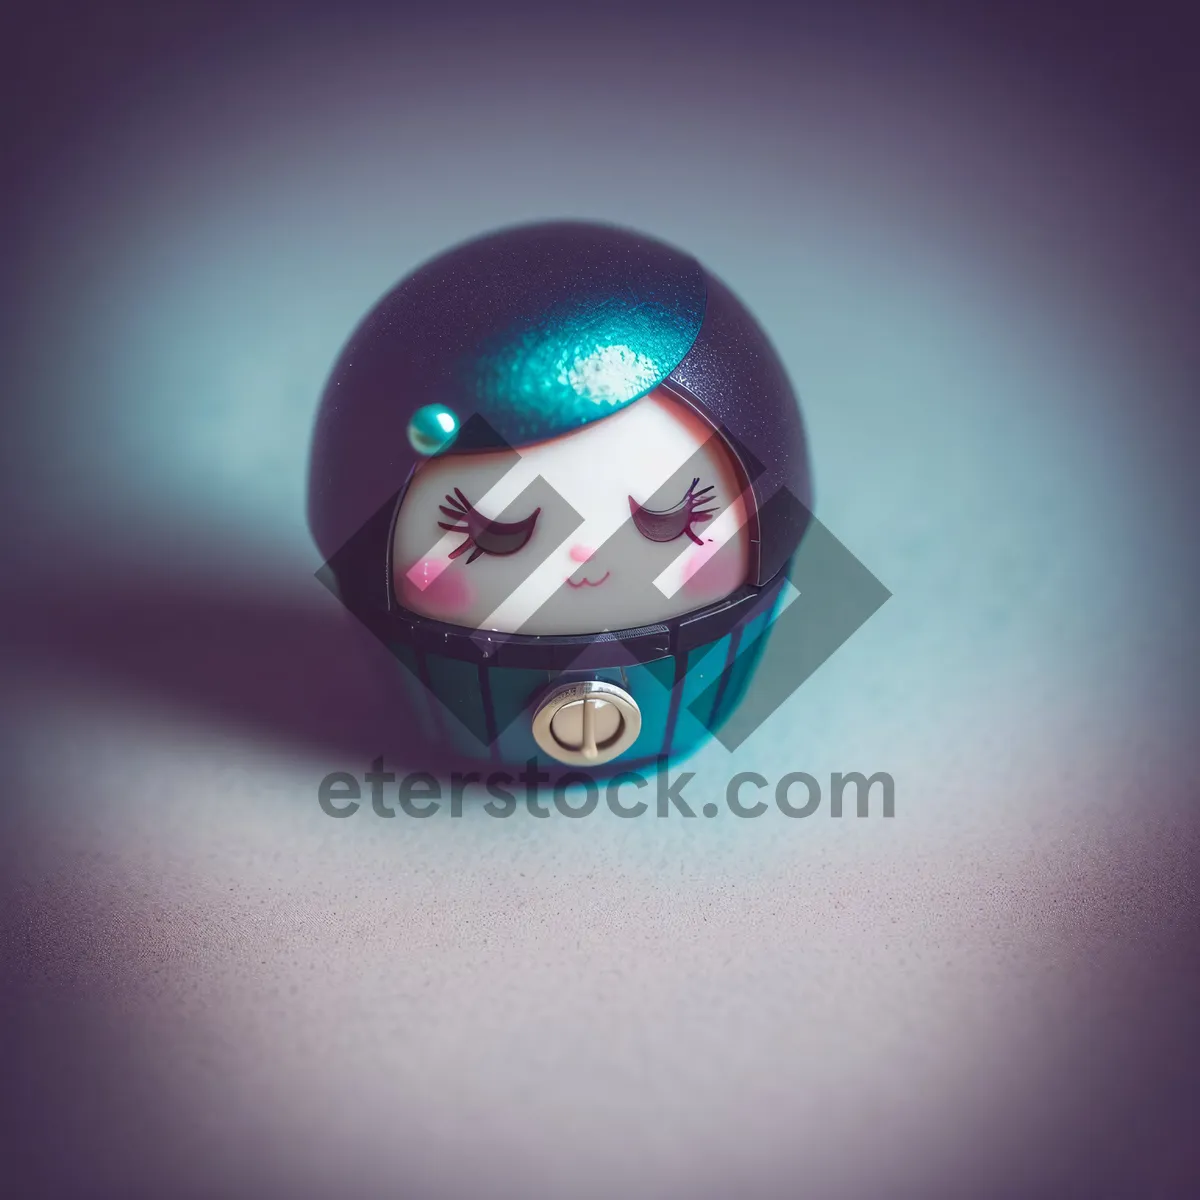 Picture of Colorful Orb of Billiard Balls on Pool Table